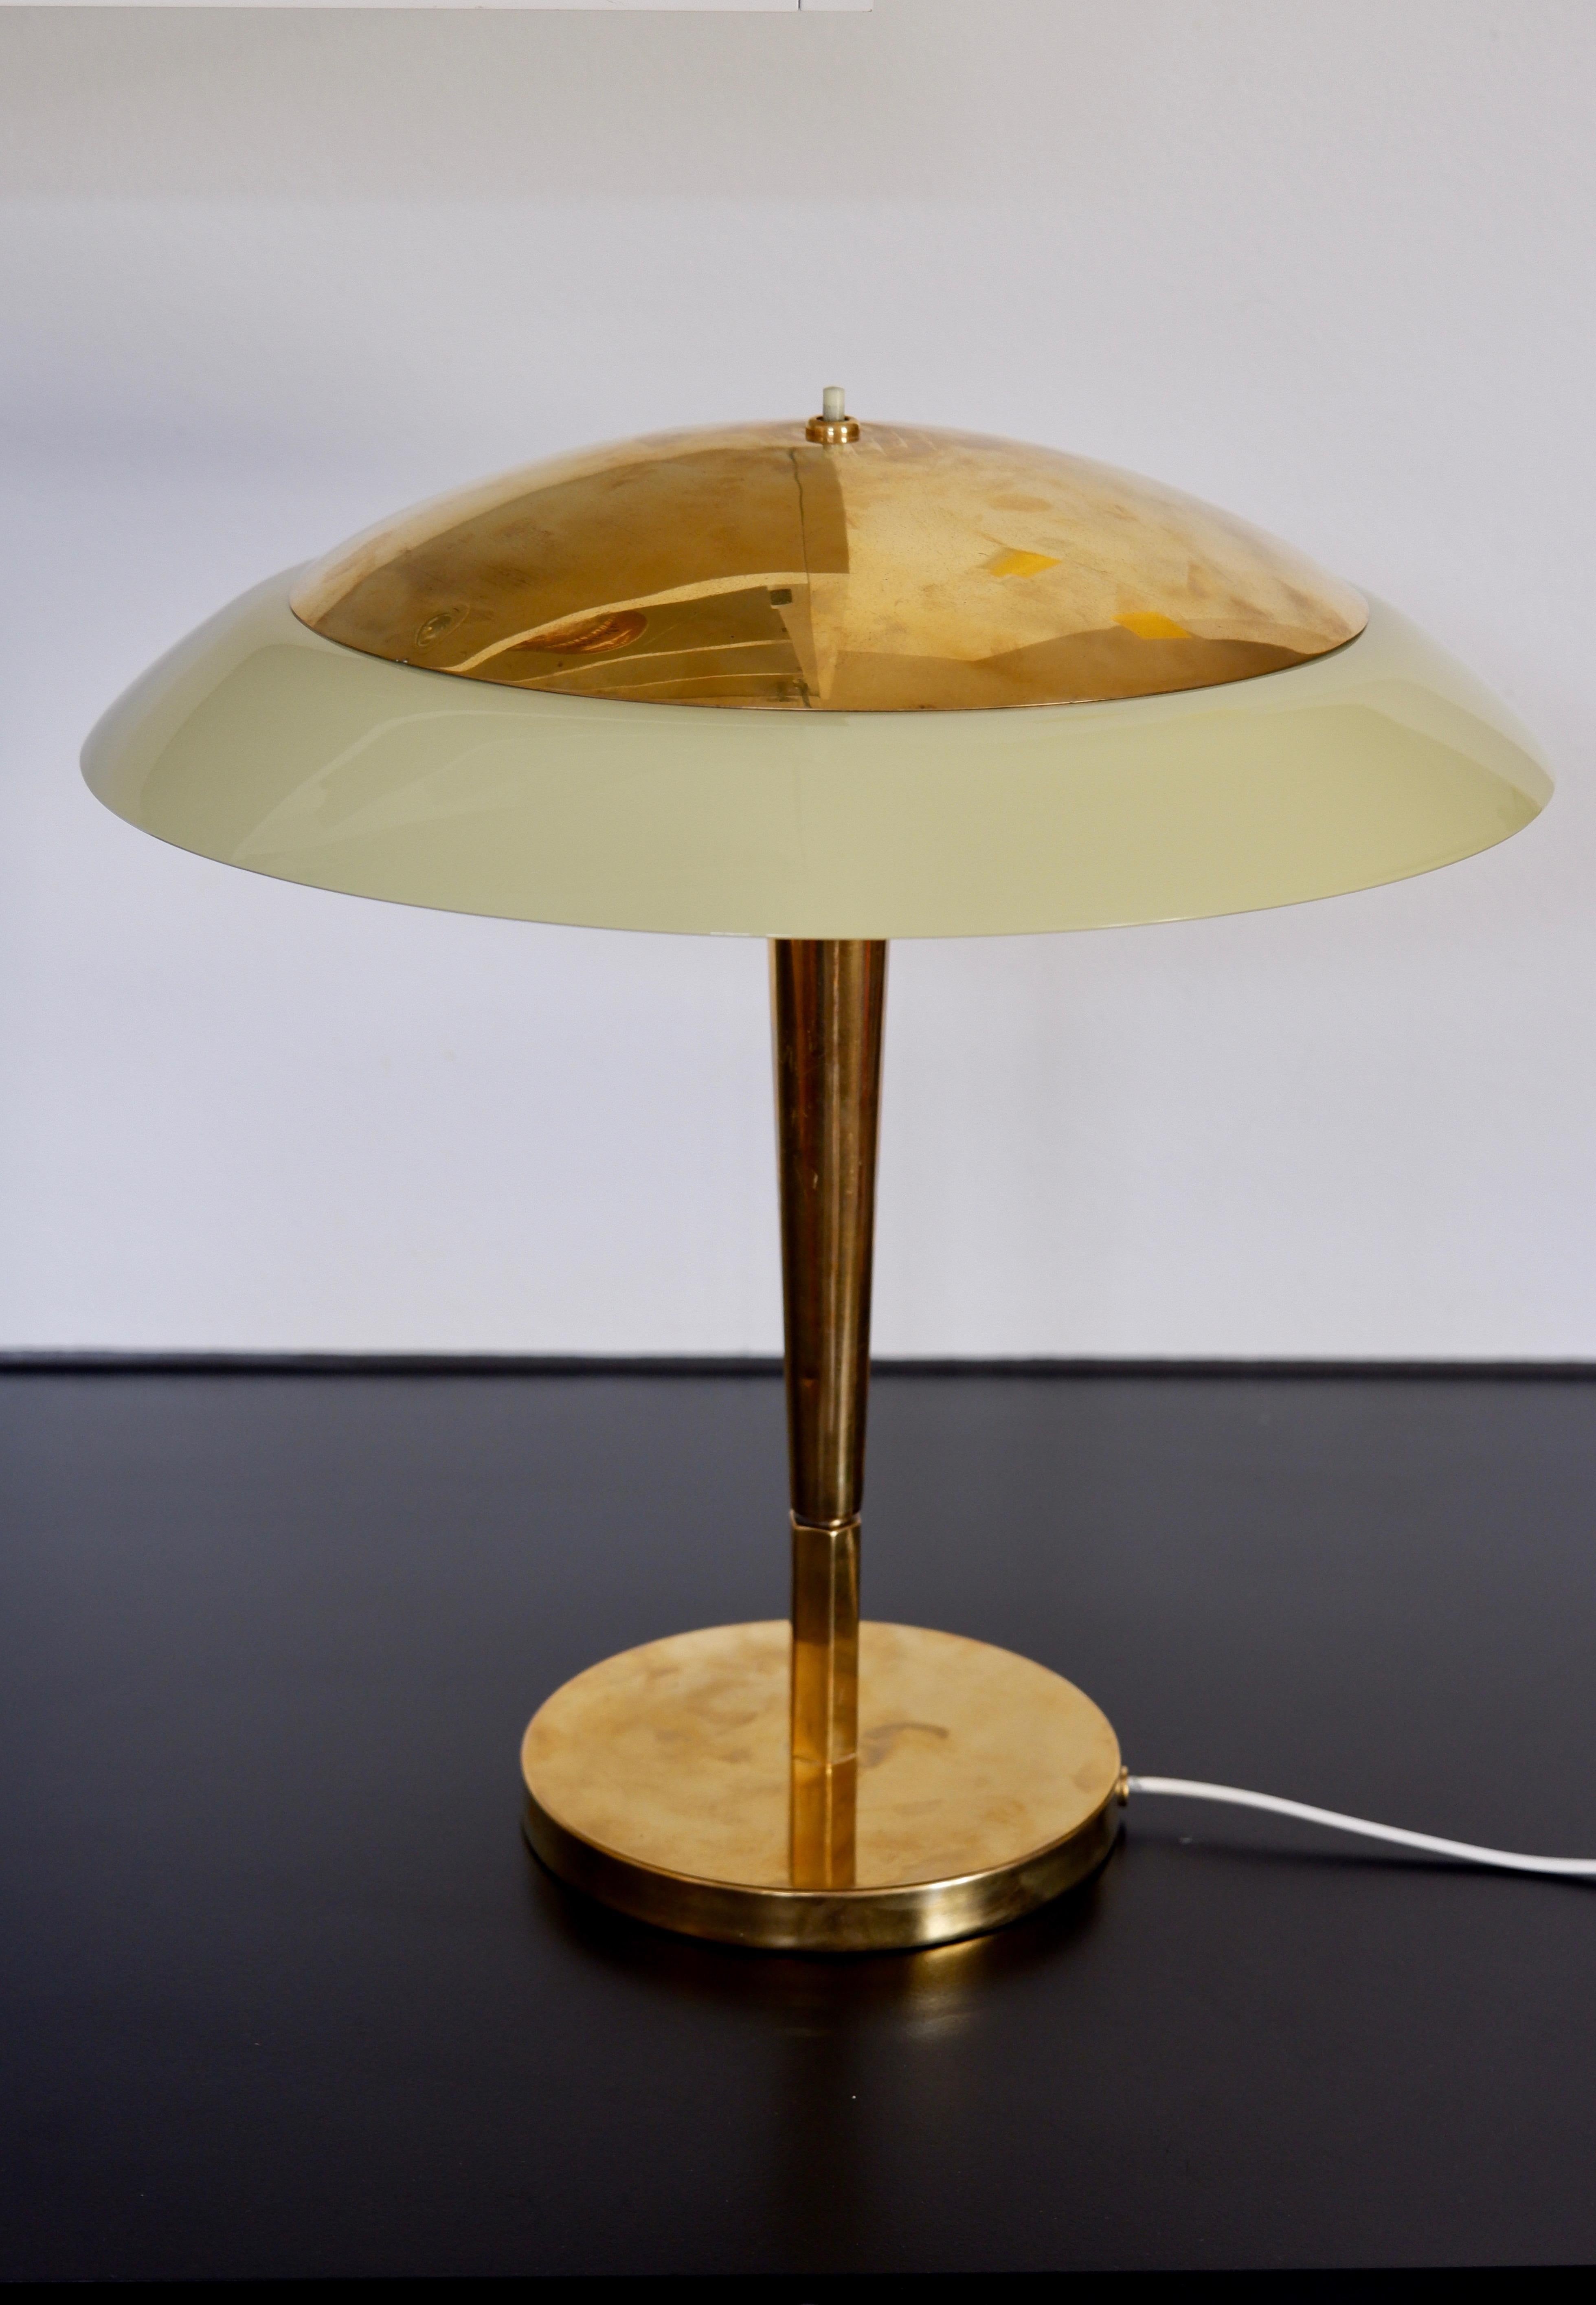 Impressive Paavo Tynell Table lamp made in polished brass and amber glass shade. The lamp is in great condition and it's stamped by the editor TAITO. Model 5061. Dimension : 38.5 cm high, 36 cm diameter.